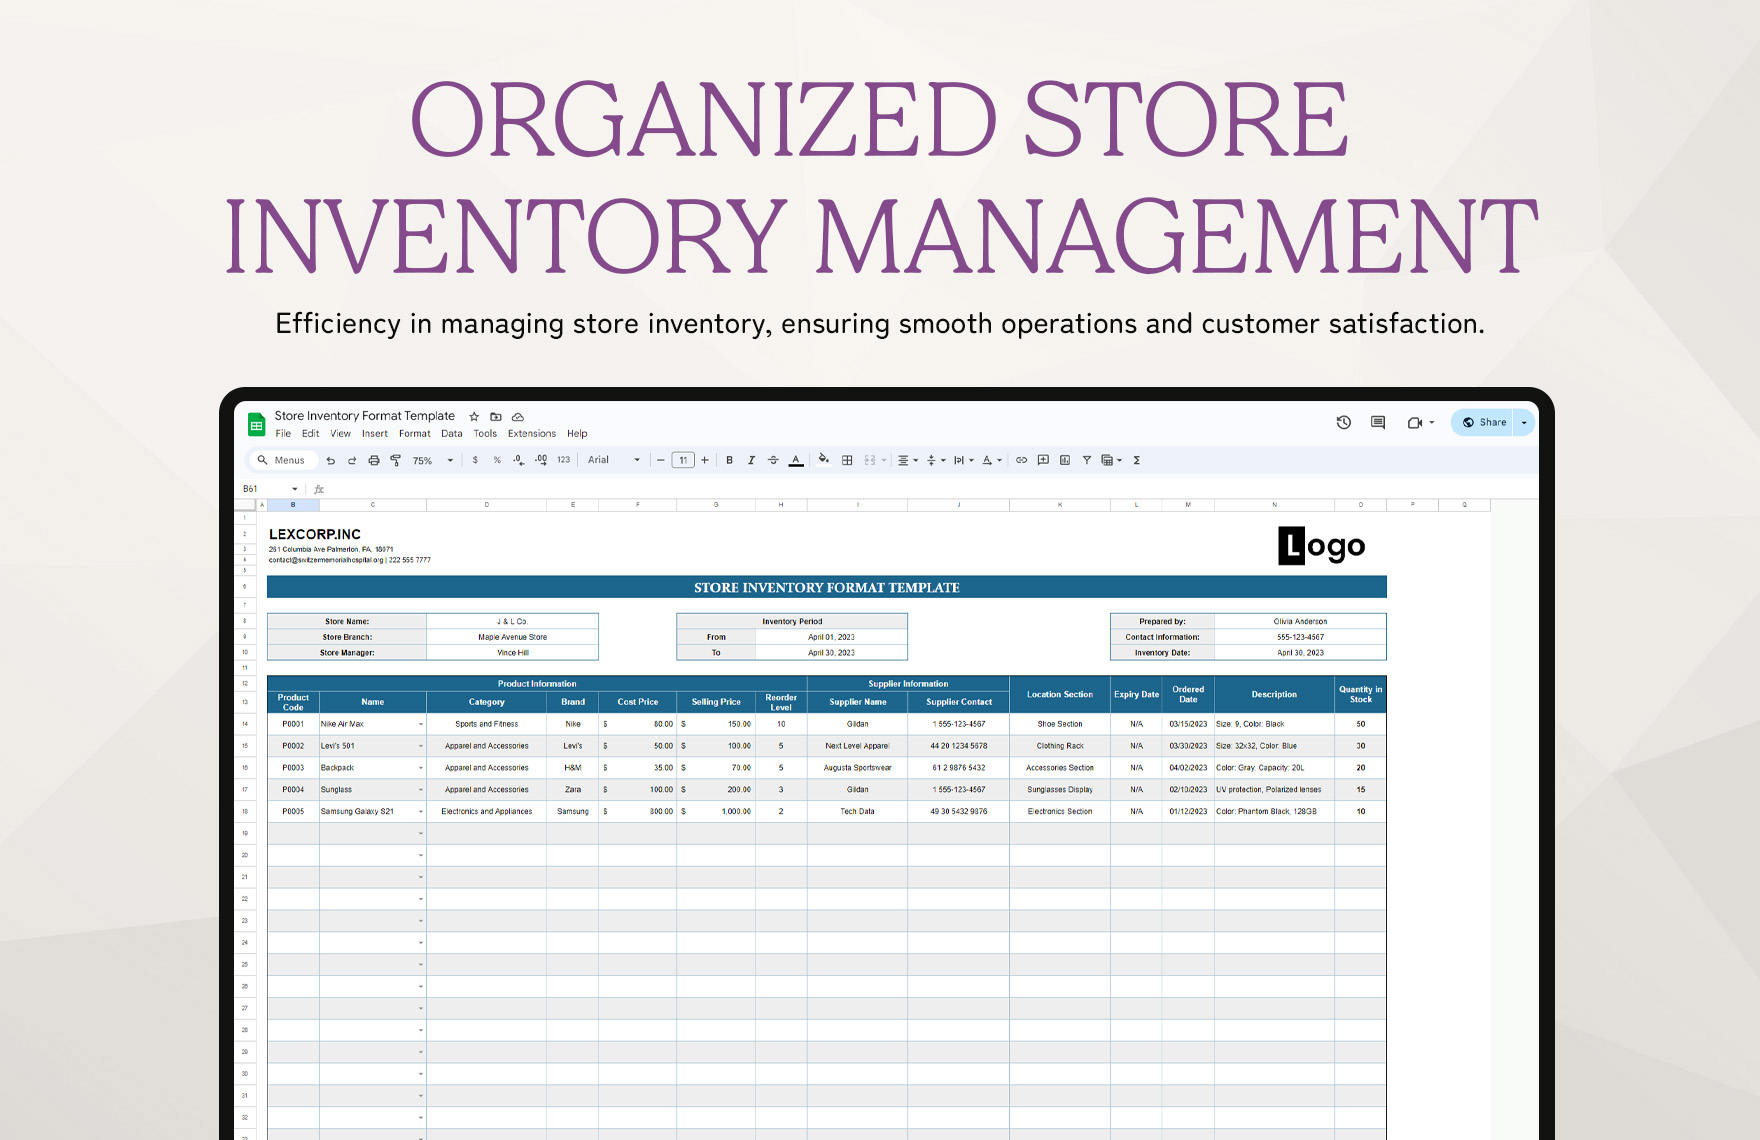 Store Inventory Format Template